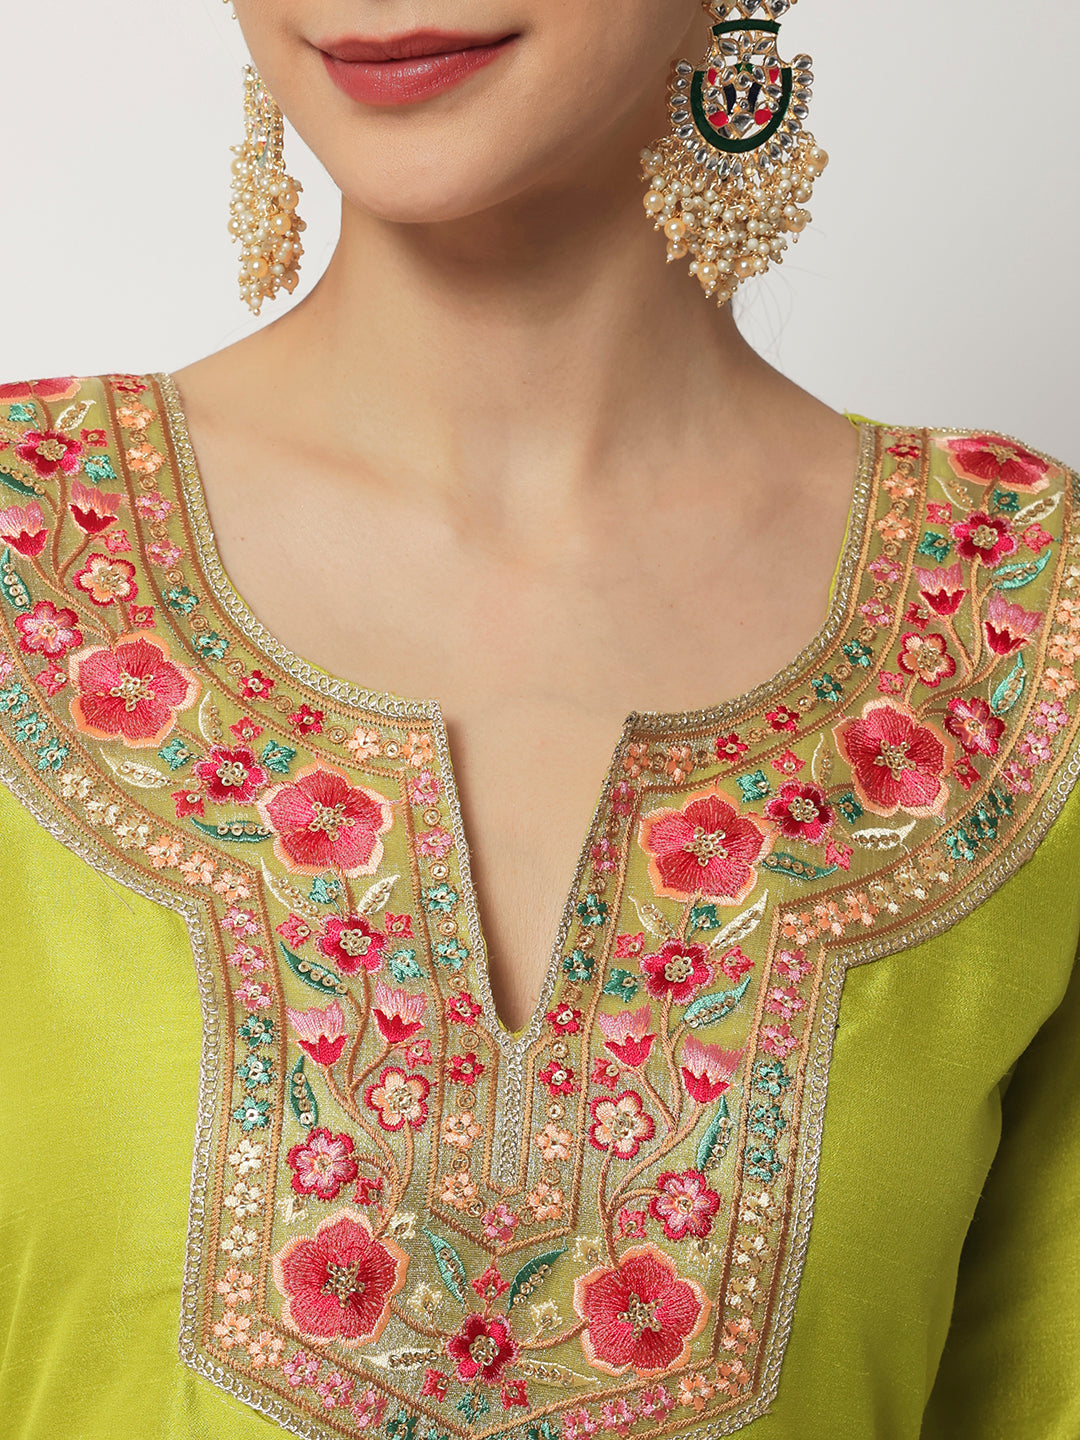 Women's Lime Green Floral Embroidered Kurti With Straight Pants And Chiffon Dupatta - Anokherang